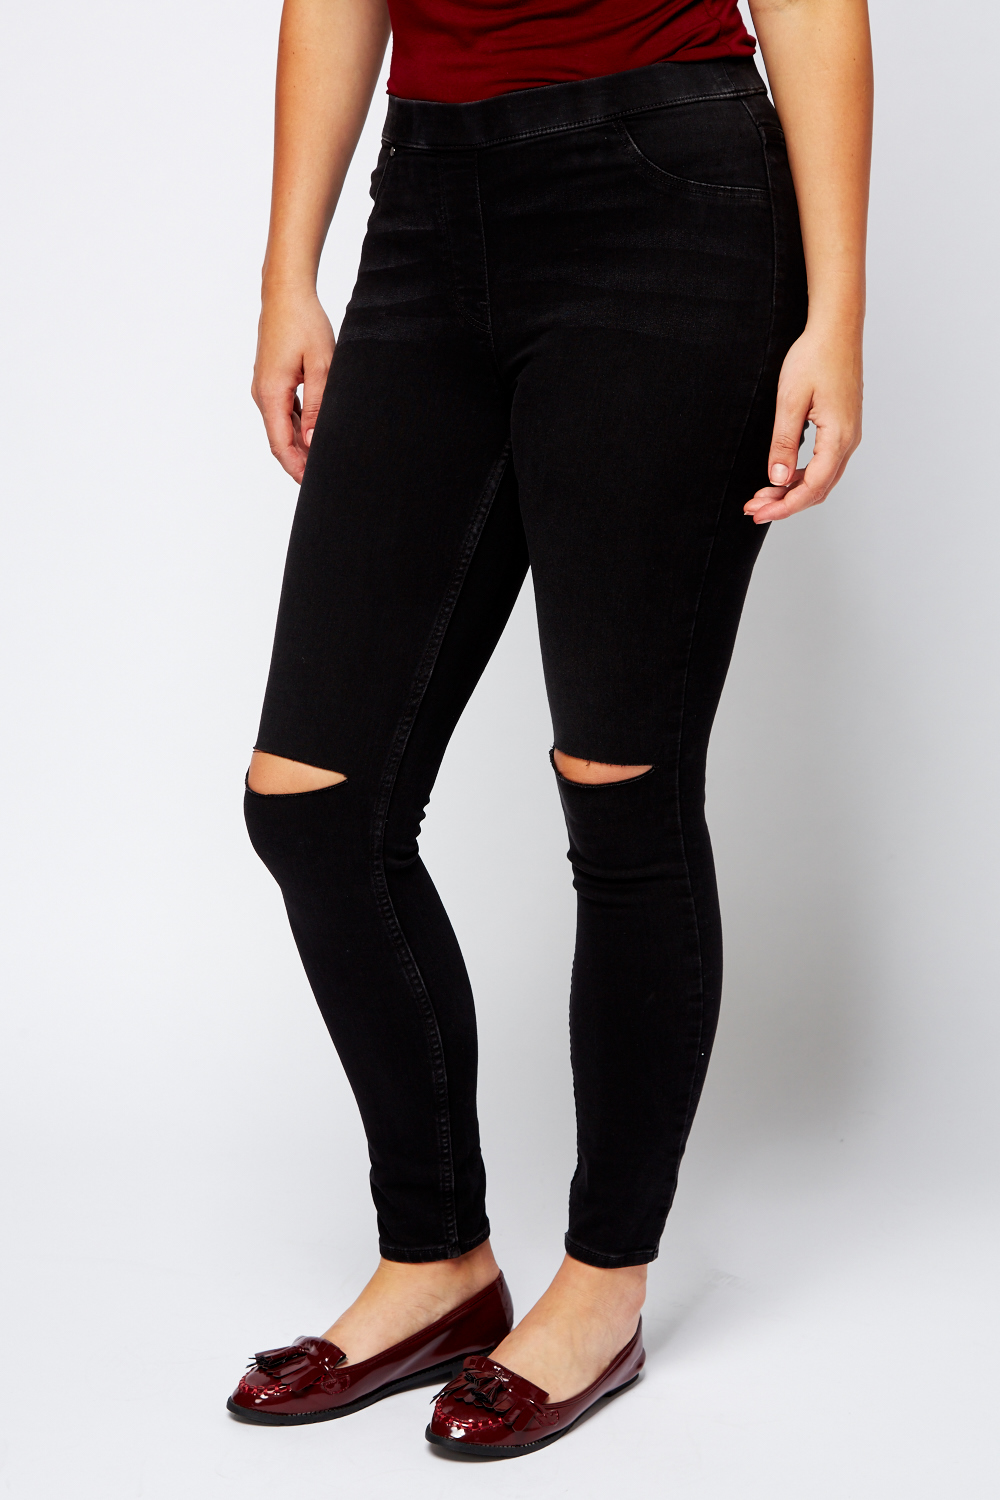 Ripped Knee Black Jeggings - Just $6